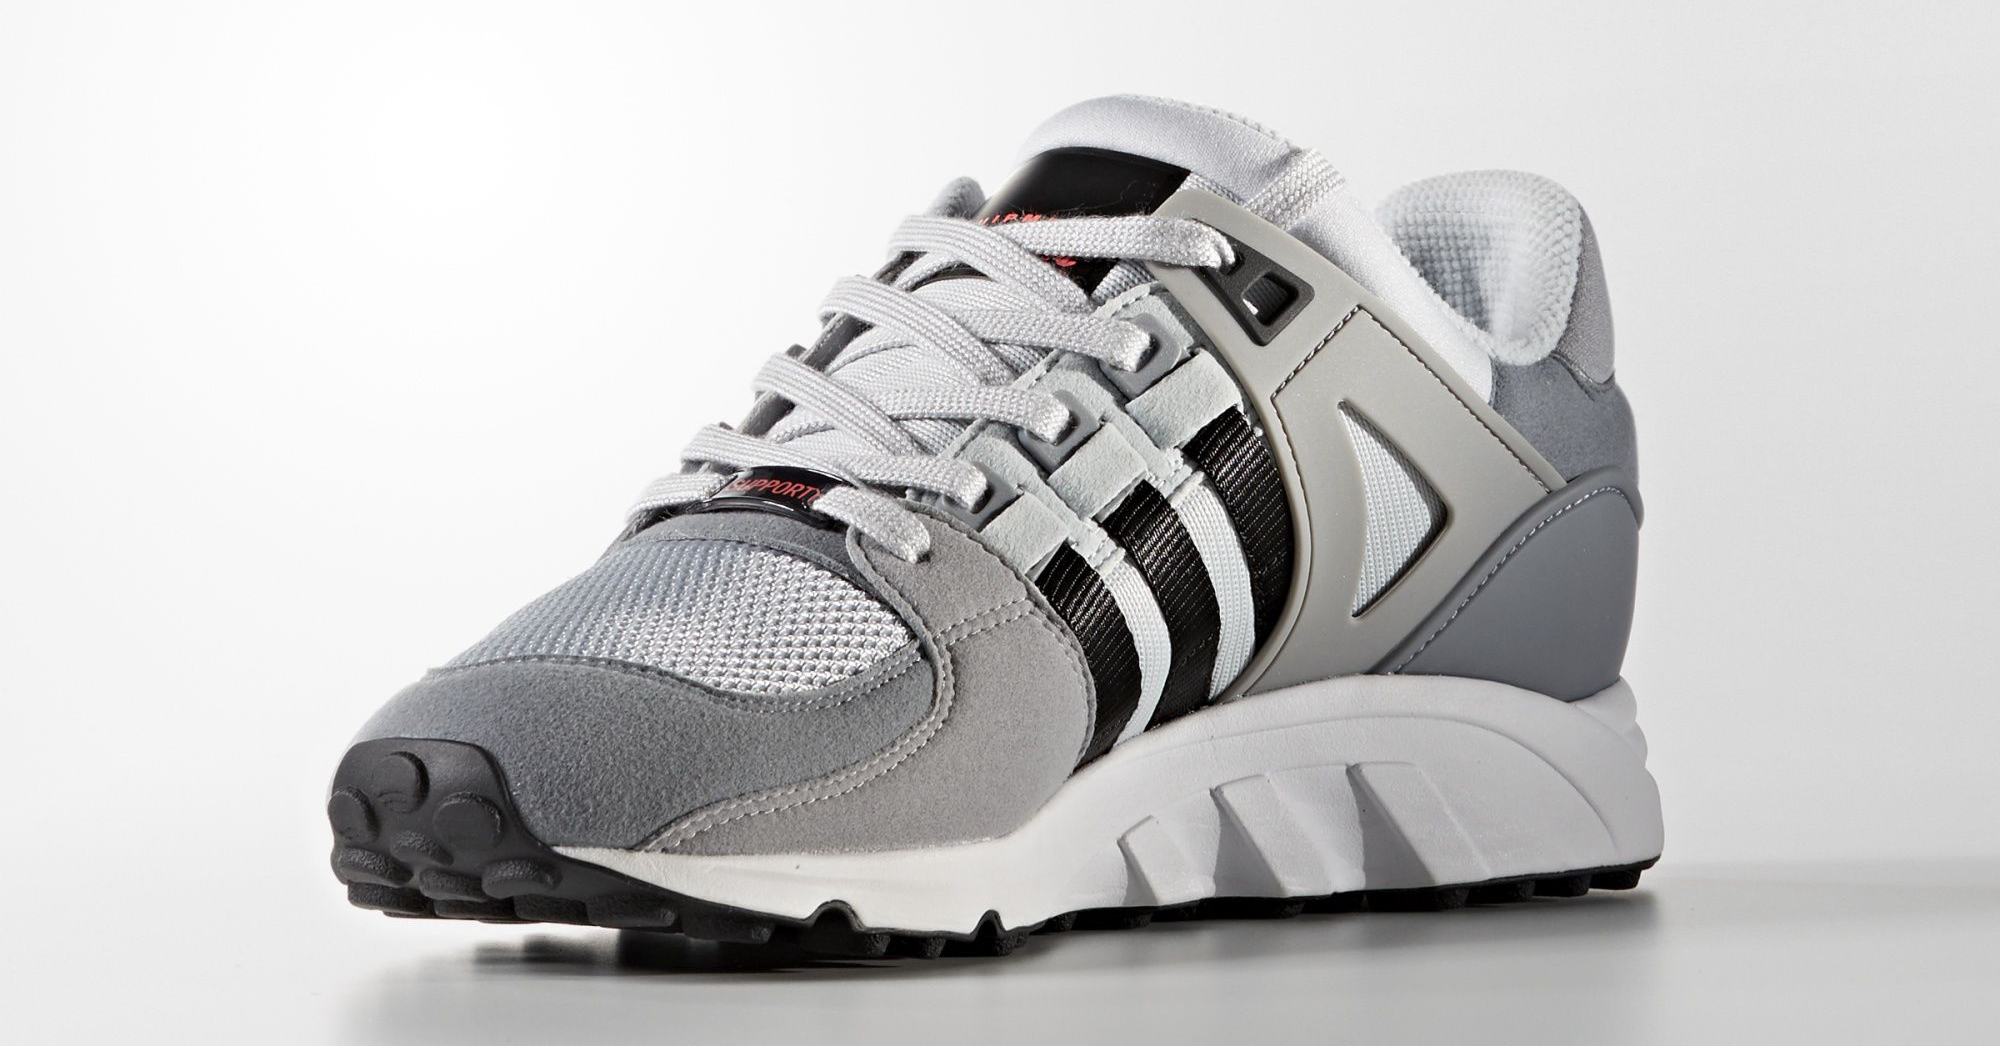 adidas-eqt-support-rf-grey-turbo-red-2